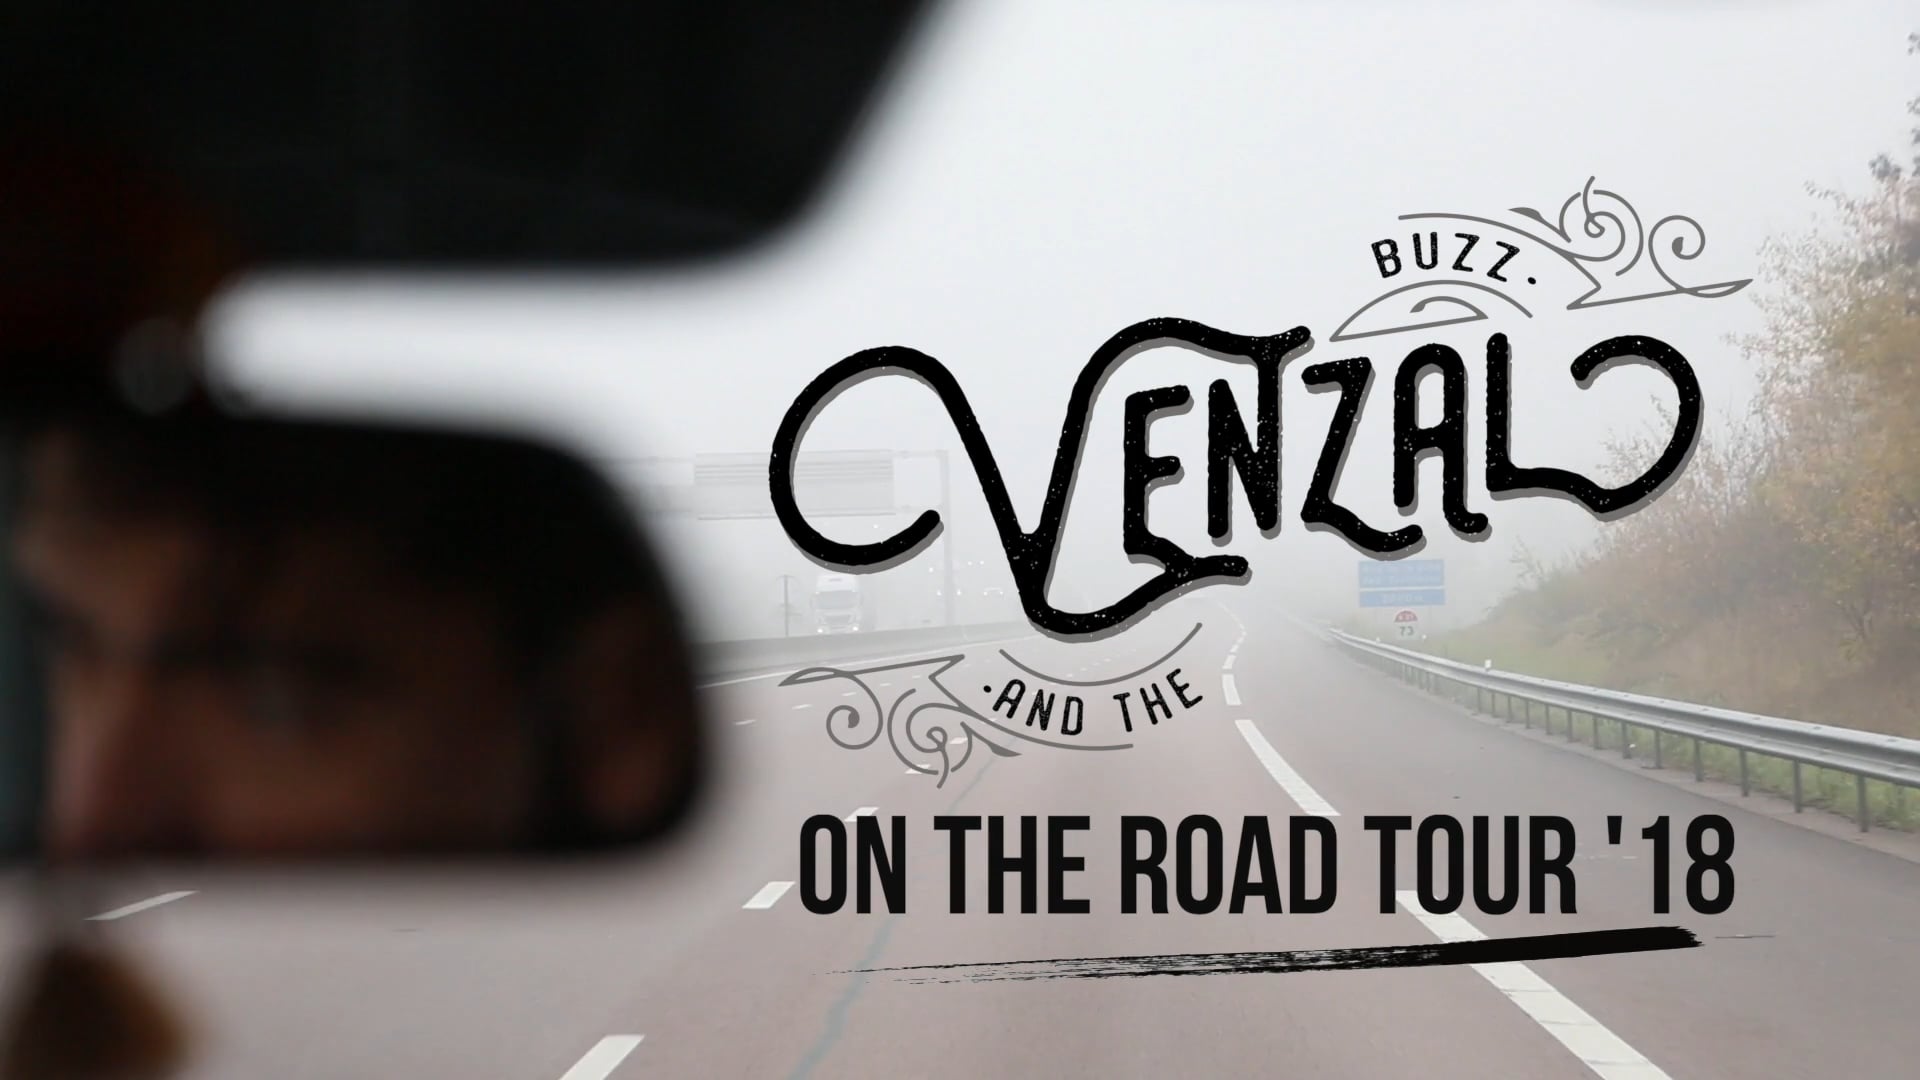 Venzal & the Buzz (on the road tour 2018)